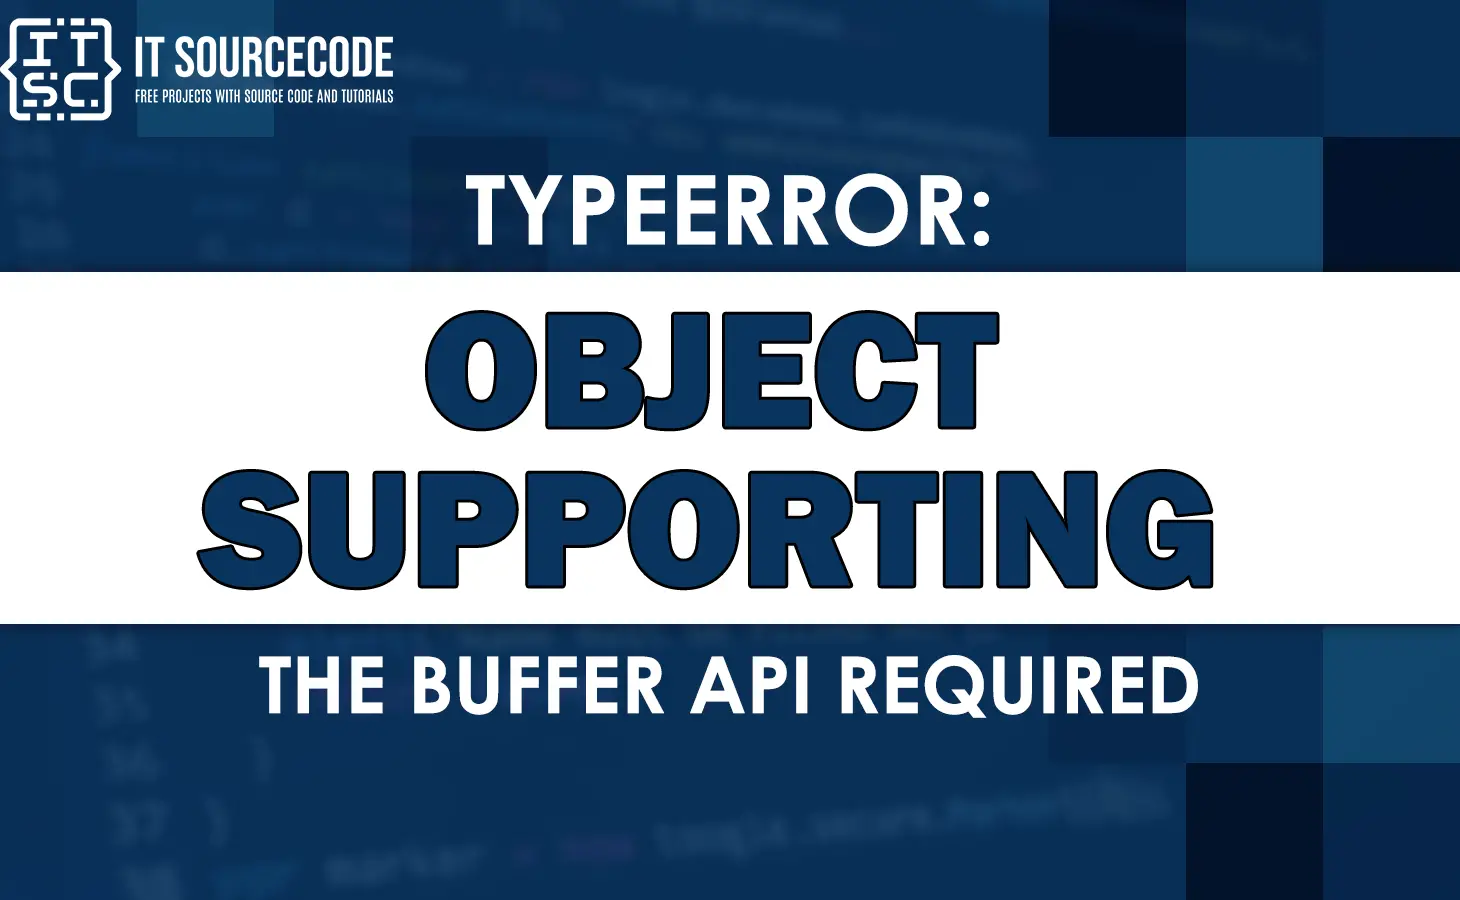 Typeerror object supporting the buffer api required